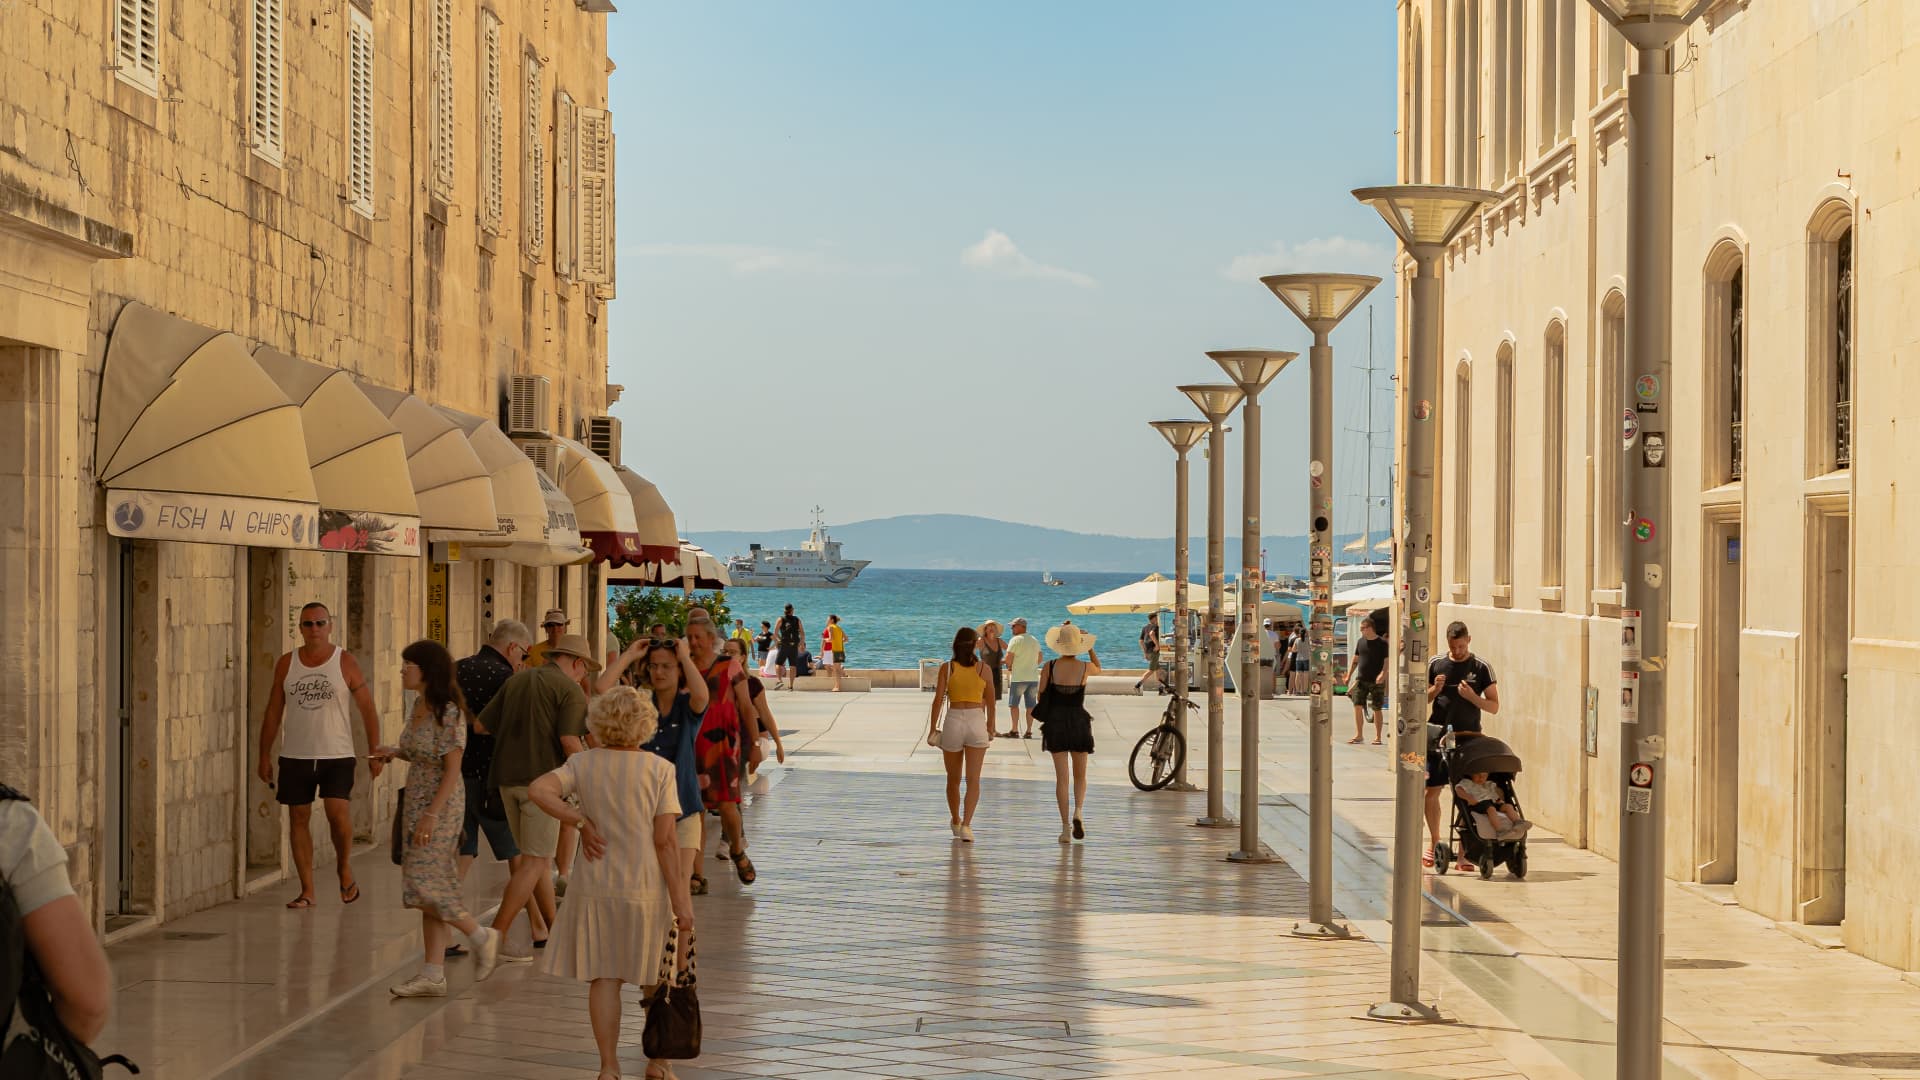 Marmontova Ulica, a busy street in Split filled with several shops and restaurants. Pictured in the distance is the island of Brač.